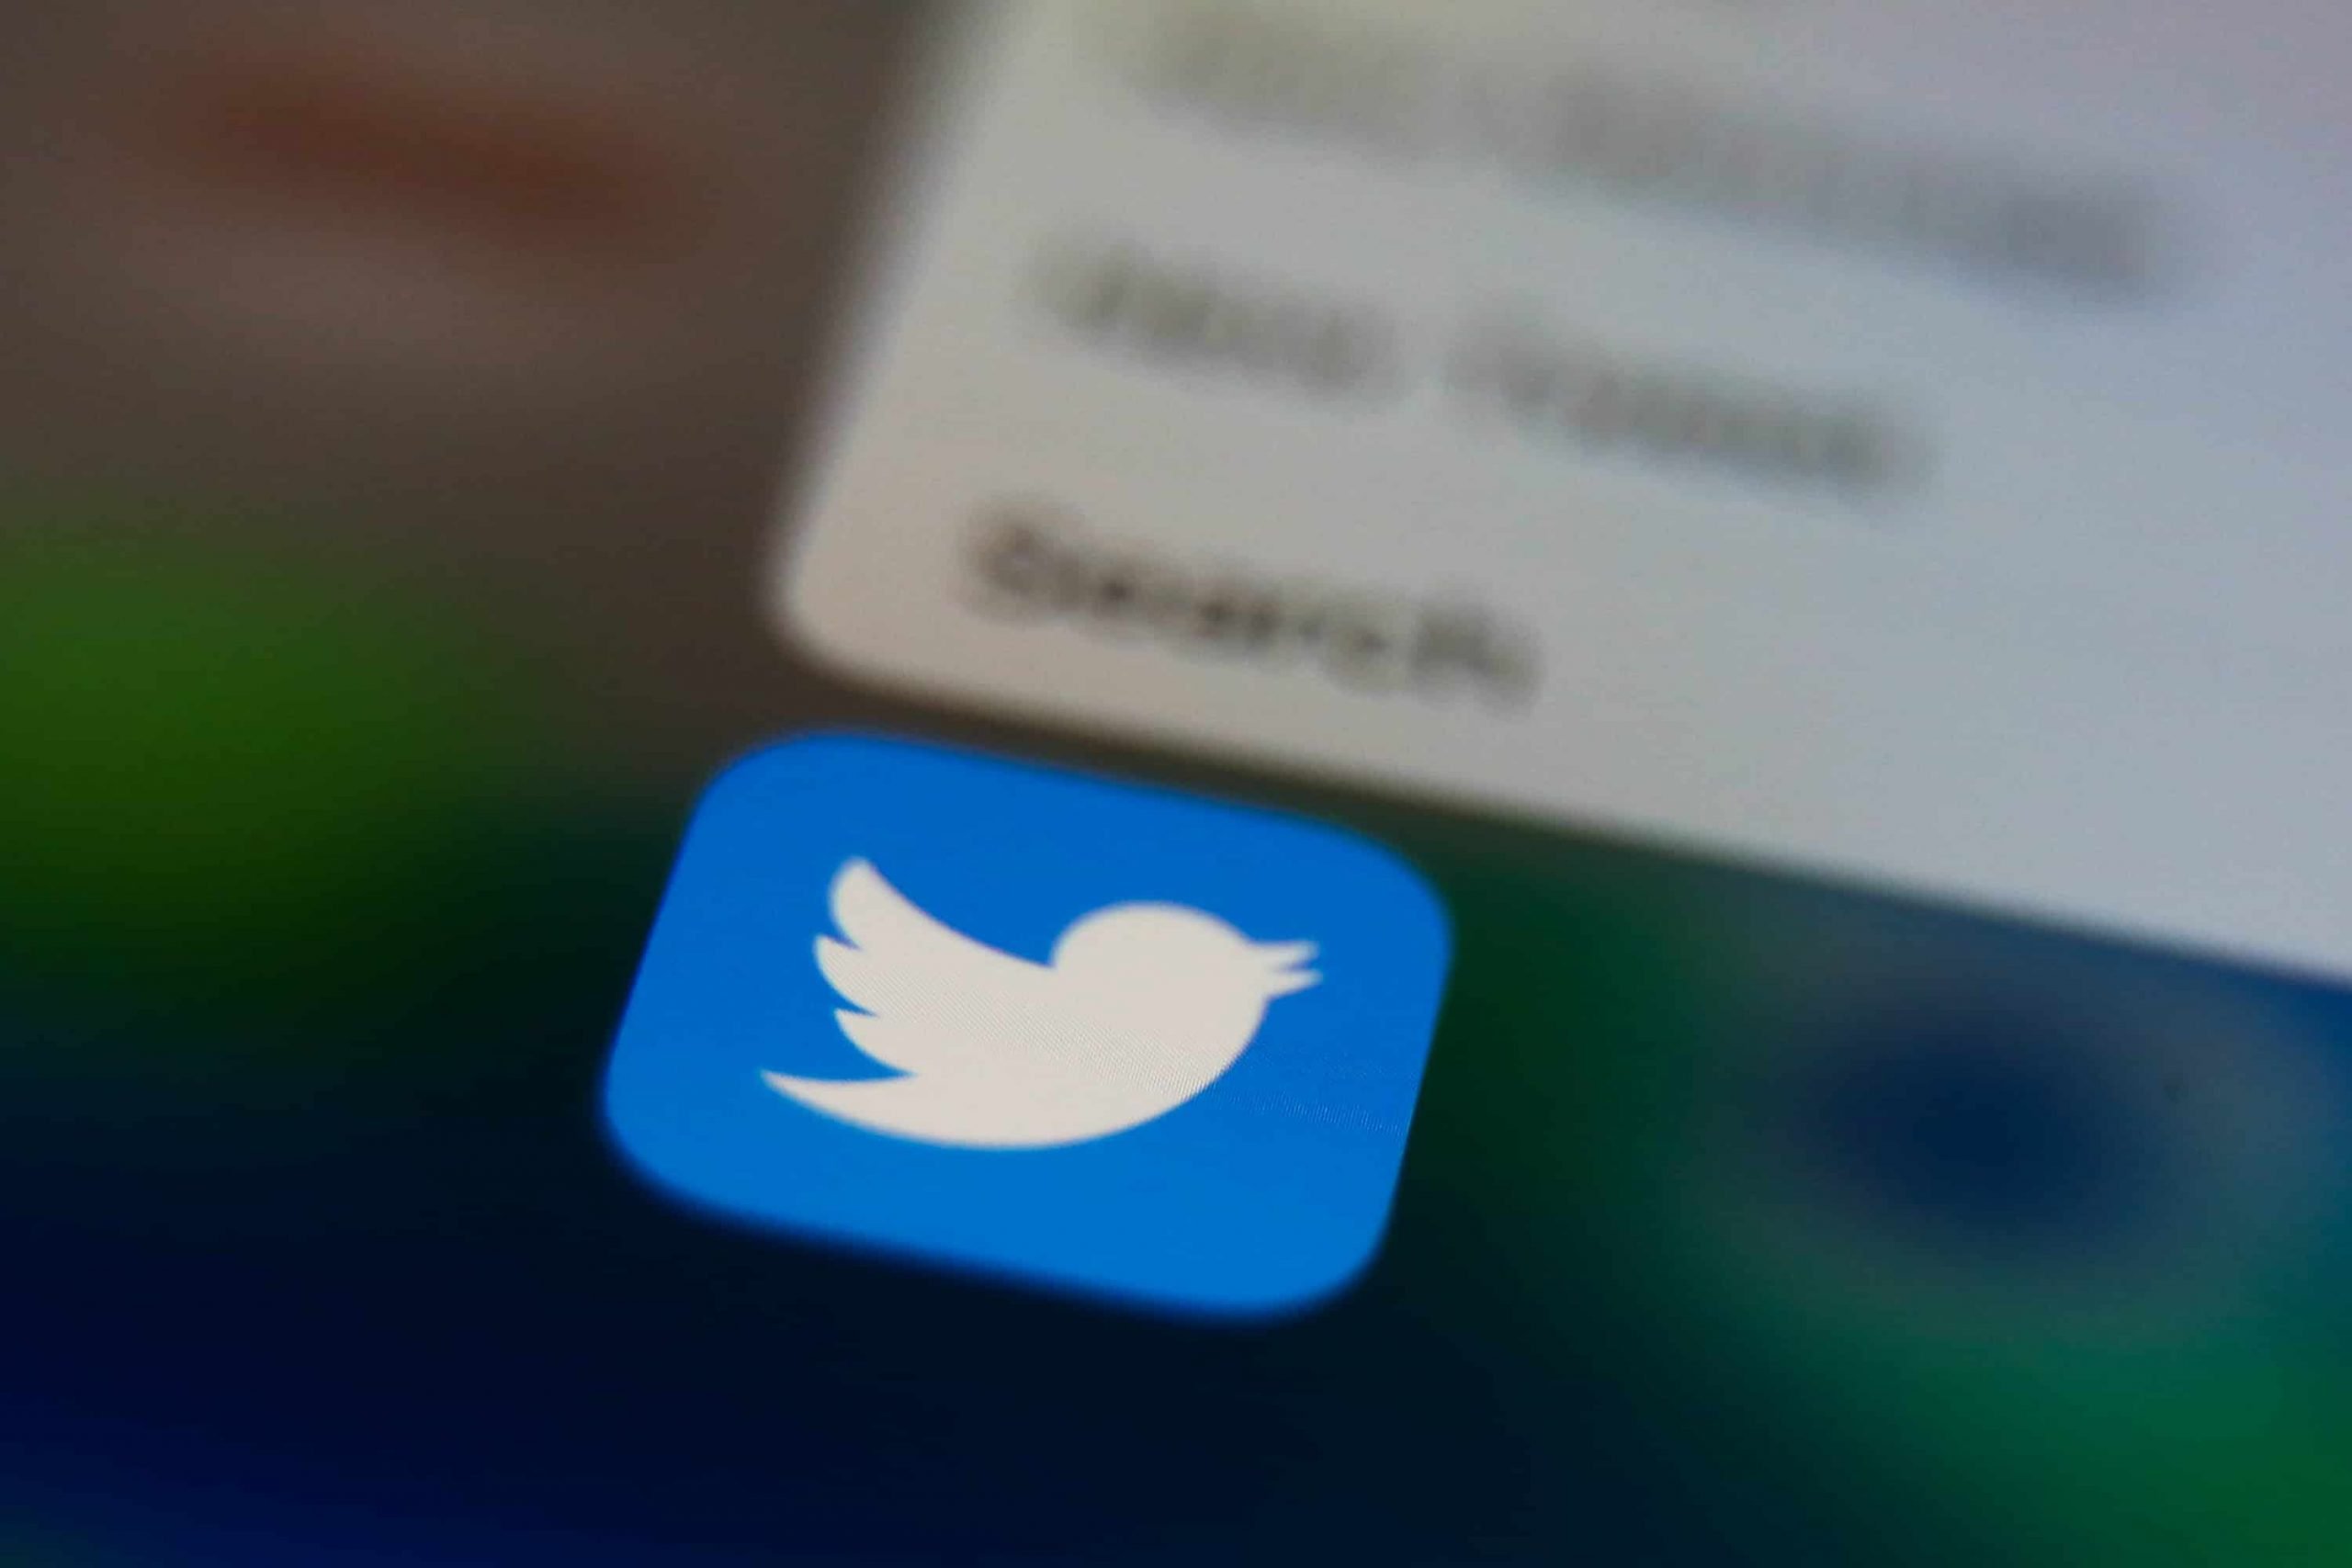 Twitter Users Will No Longer Be Able To Retweet Or Reply To Tweets Marked With A “Misleading Information” Label—Specifically Targeting Spreading False Political & Health Information